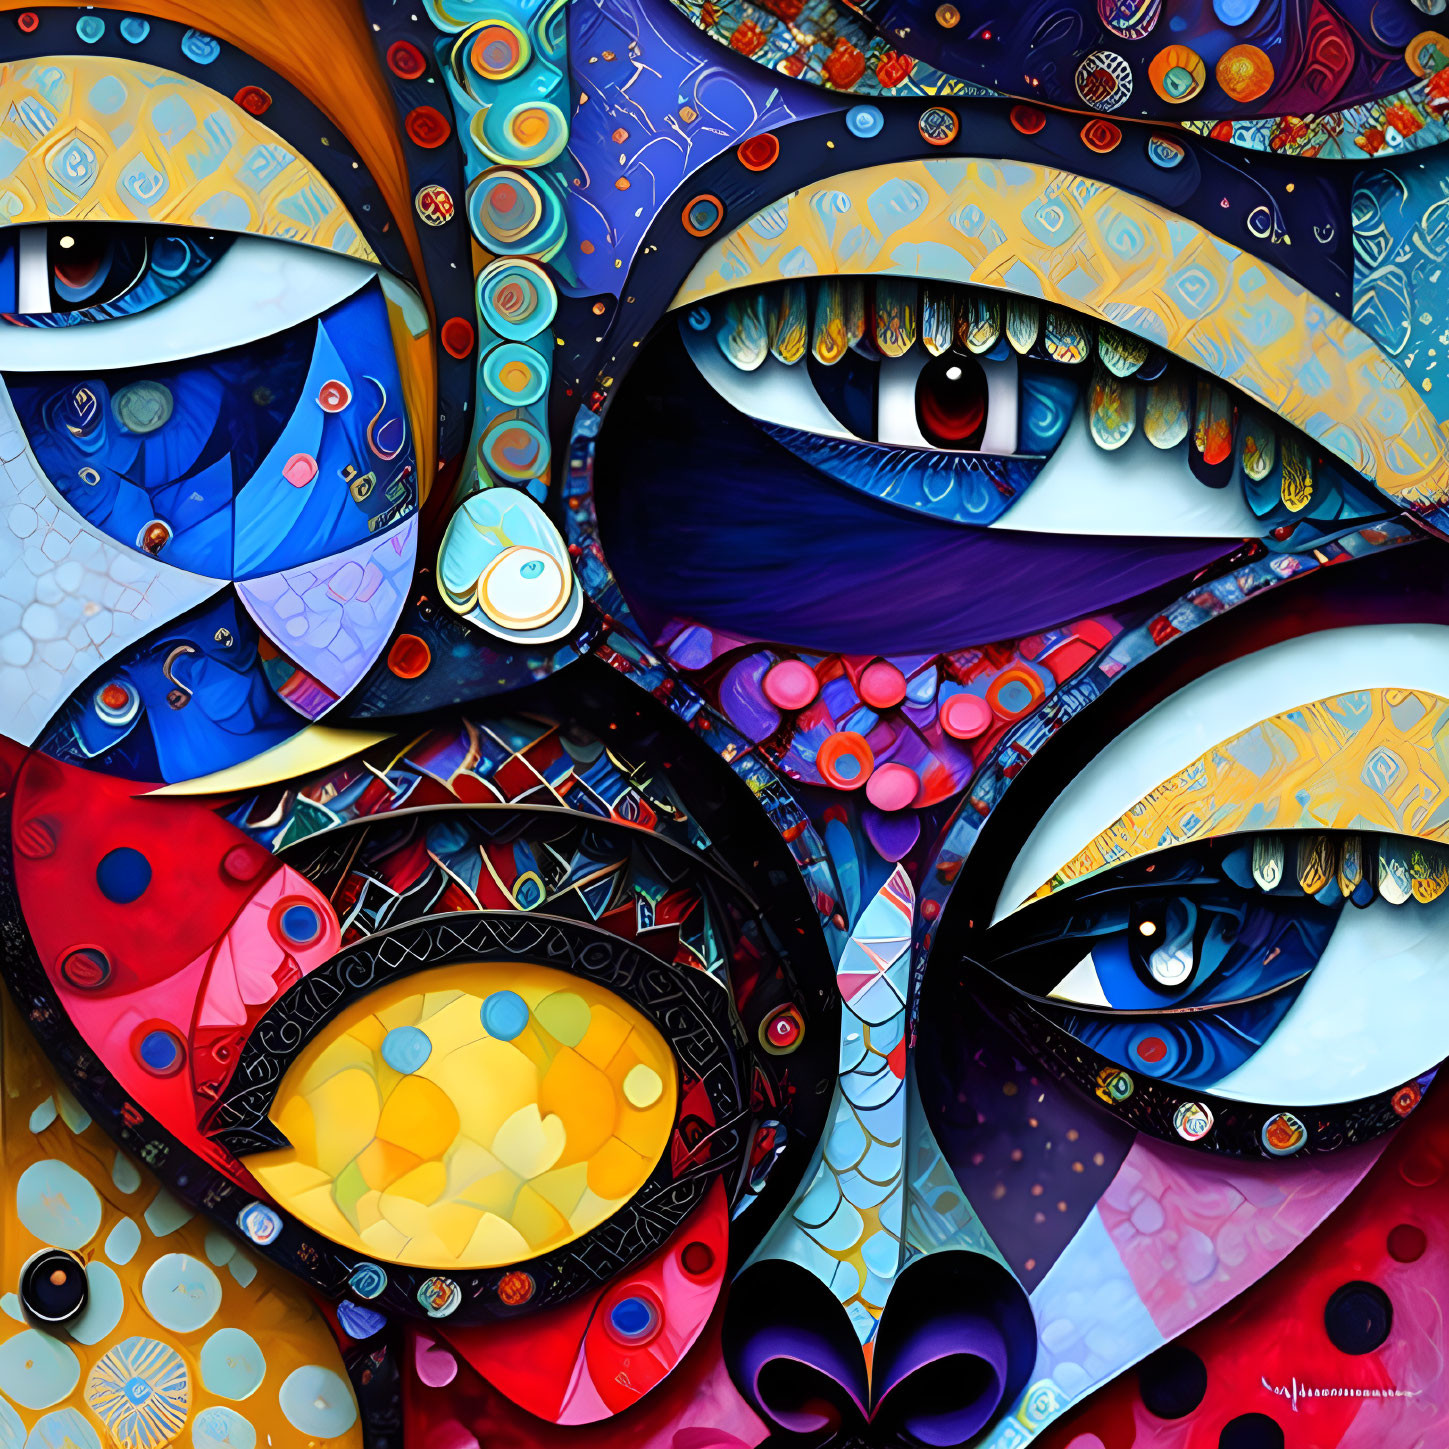 Colorful digital artwork featuring intricate eye patterns and abstract shapes